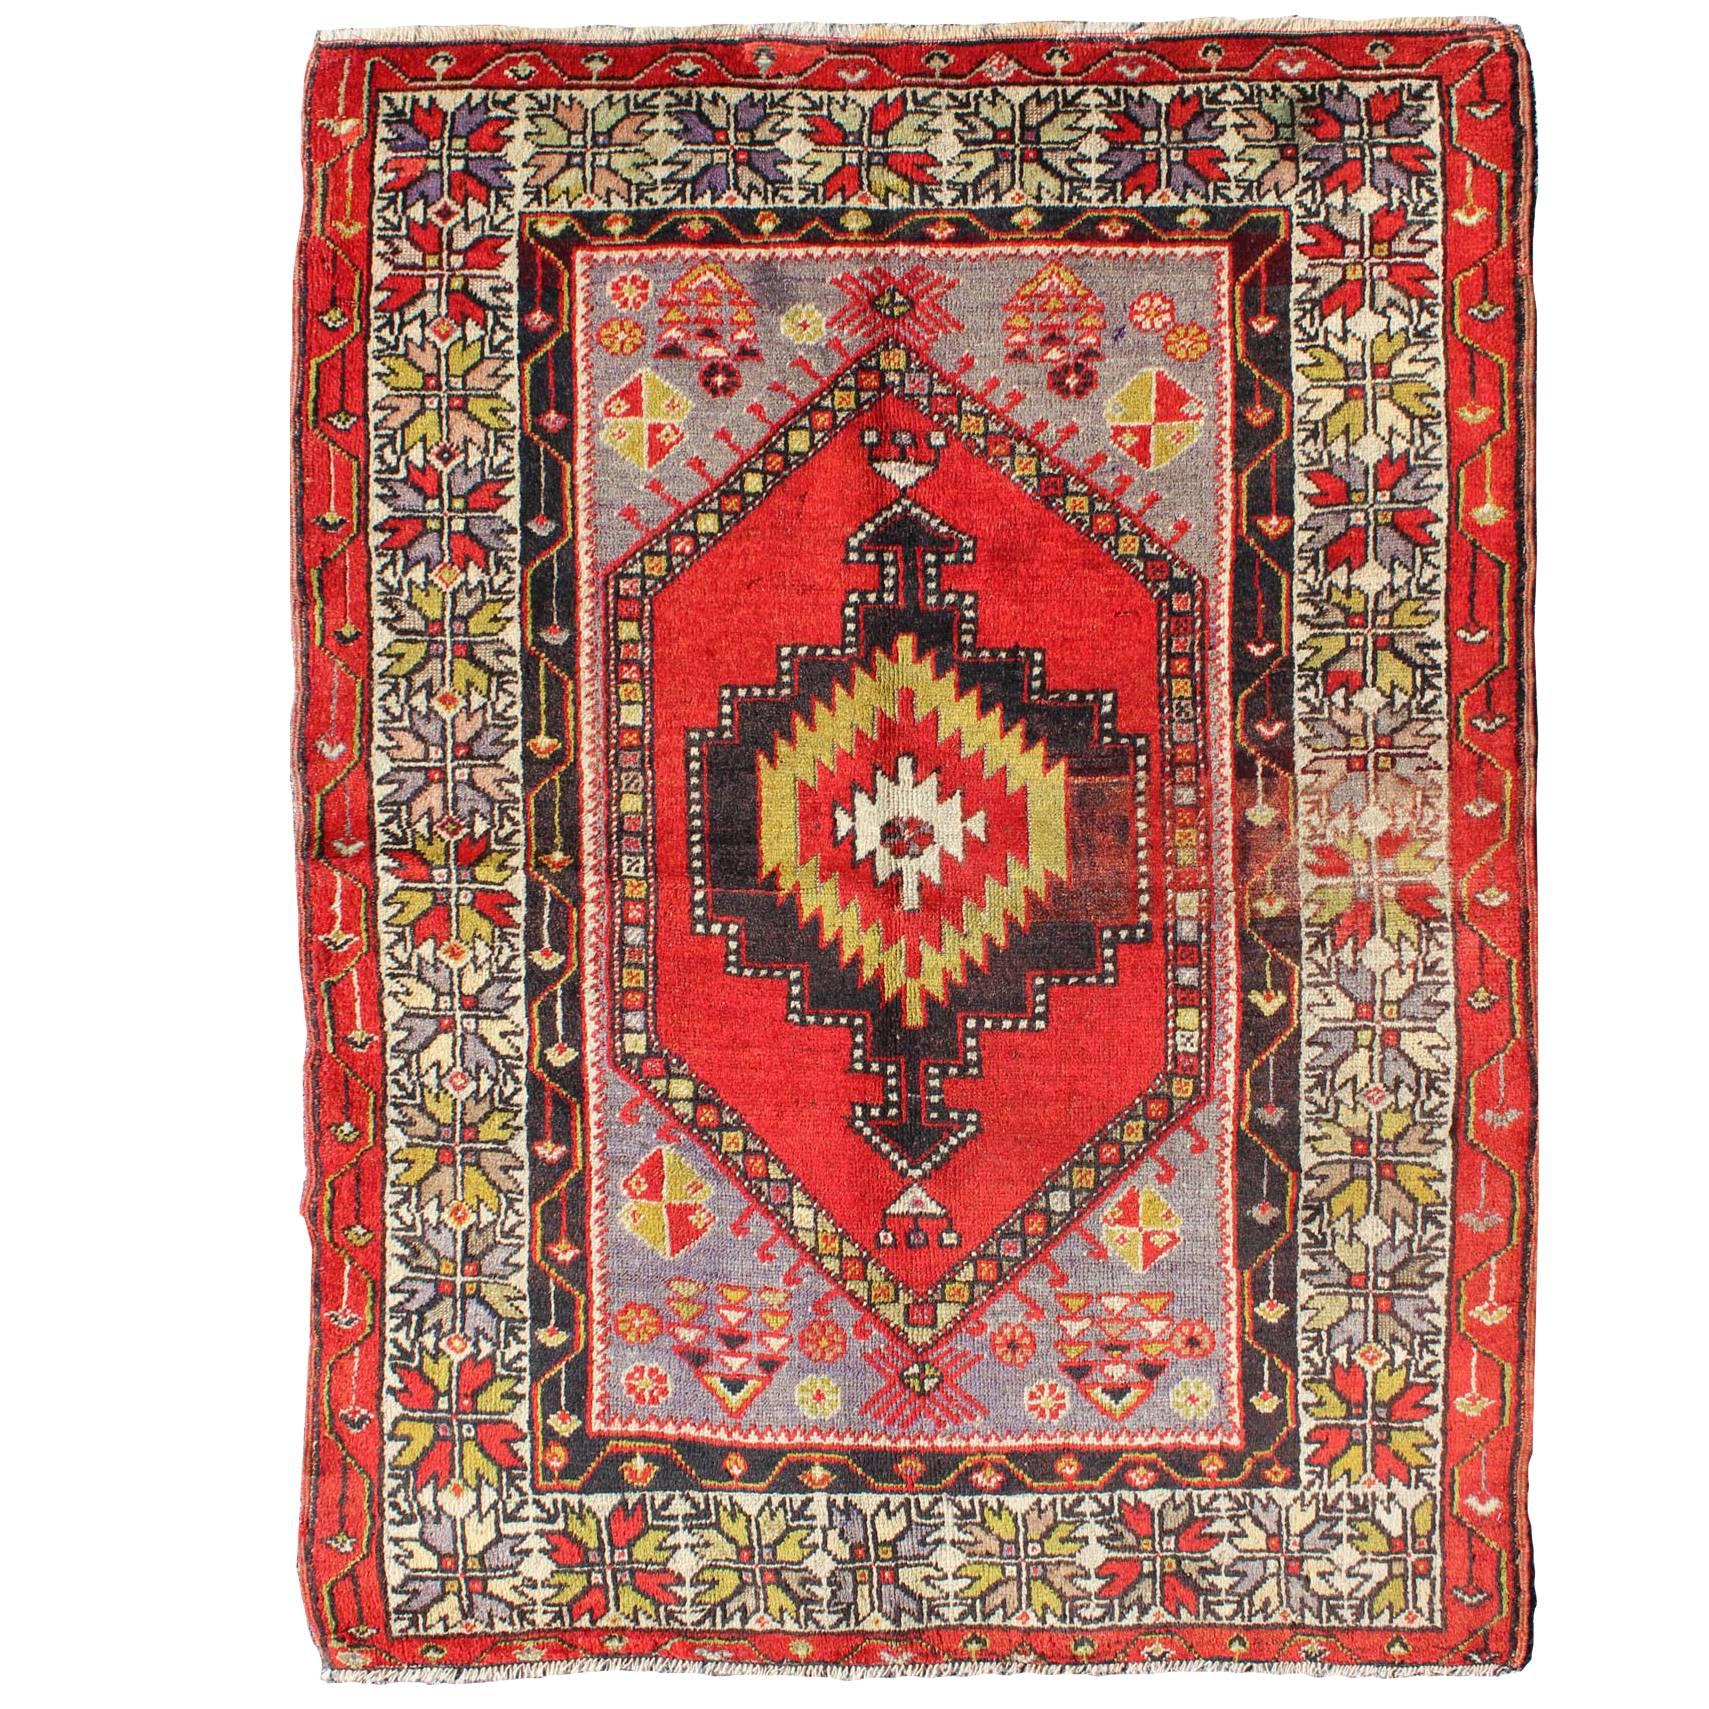 Early 20th Century Antique Oushak Rug from Turkey with Multicolored Geometrics